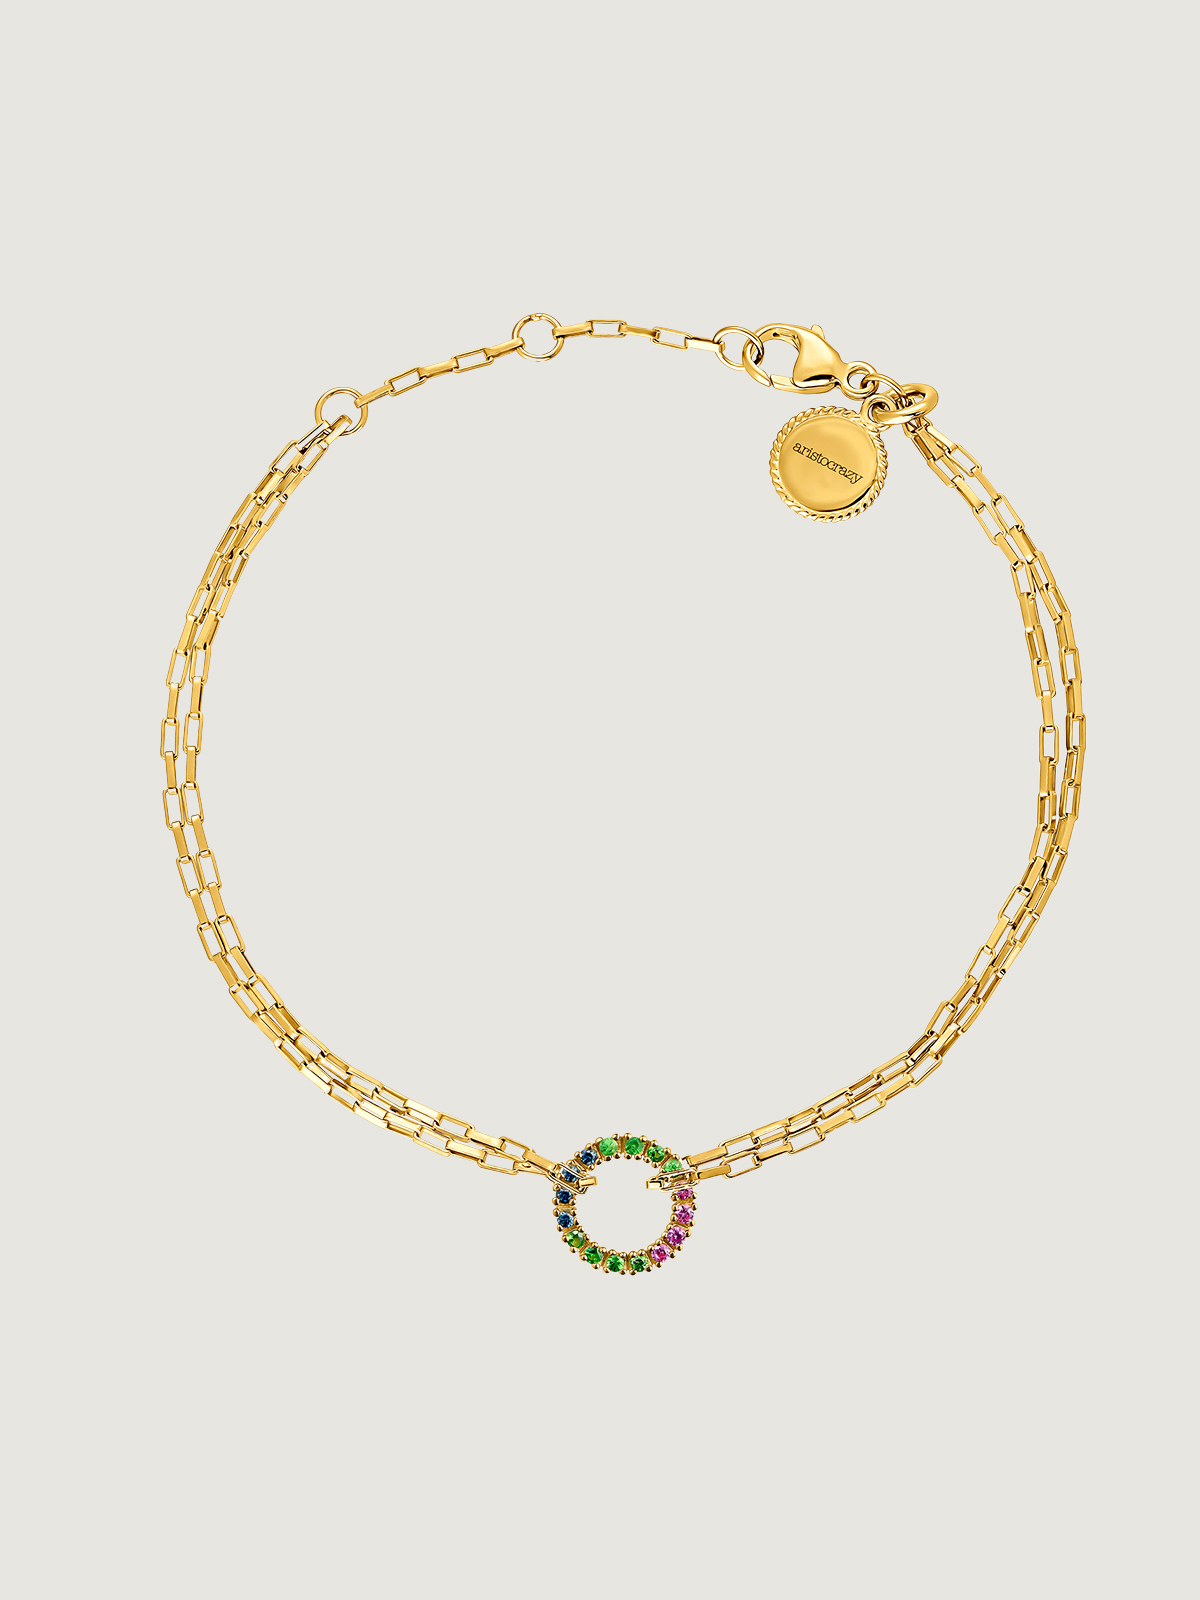 925 Silver Forza link bracelet bathed in 18K yellow gold with a multicolor stone ring